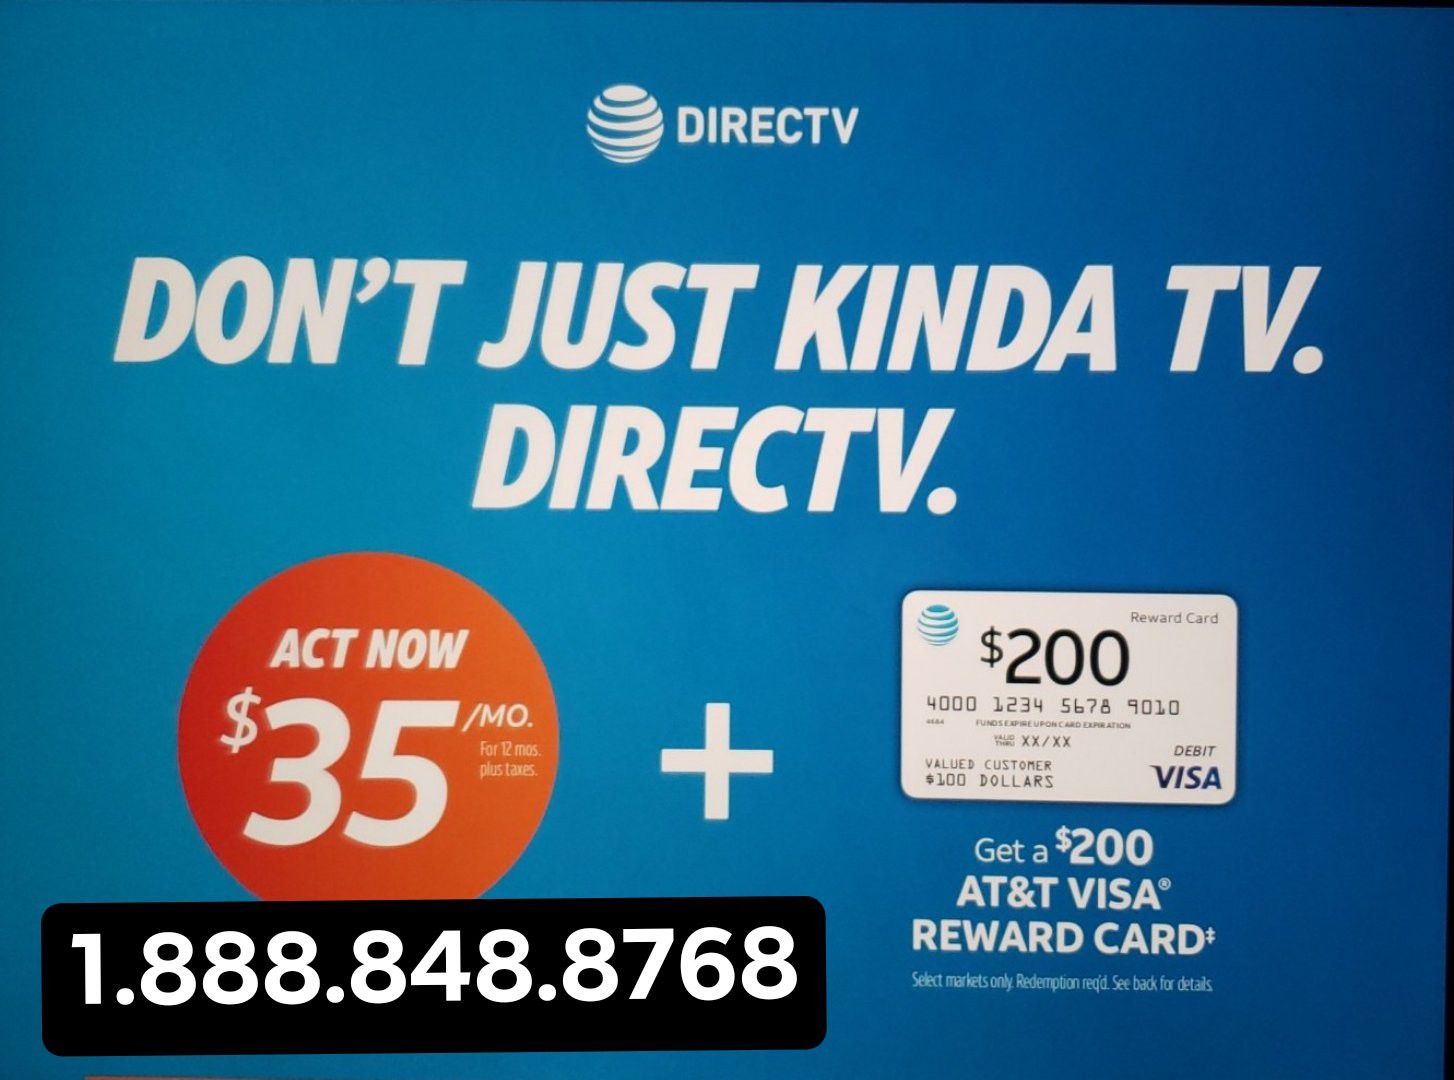 DirecTV Free Install and DVR English and Spanish packages